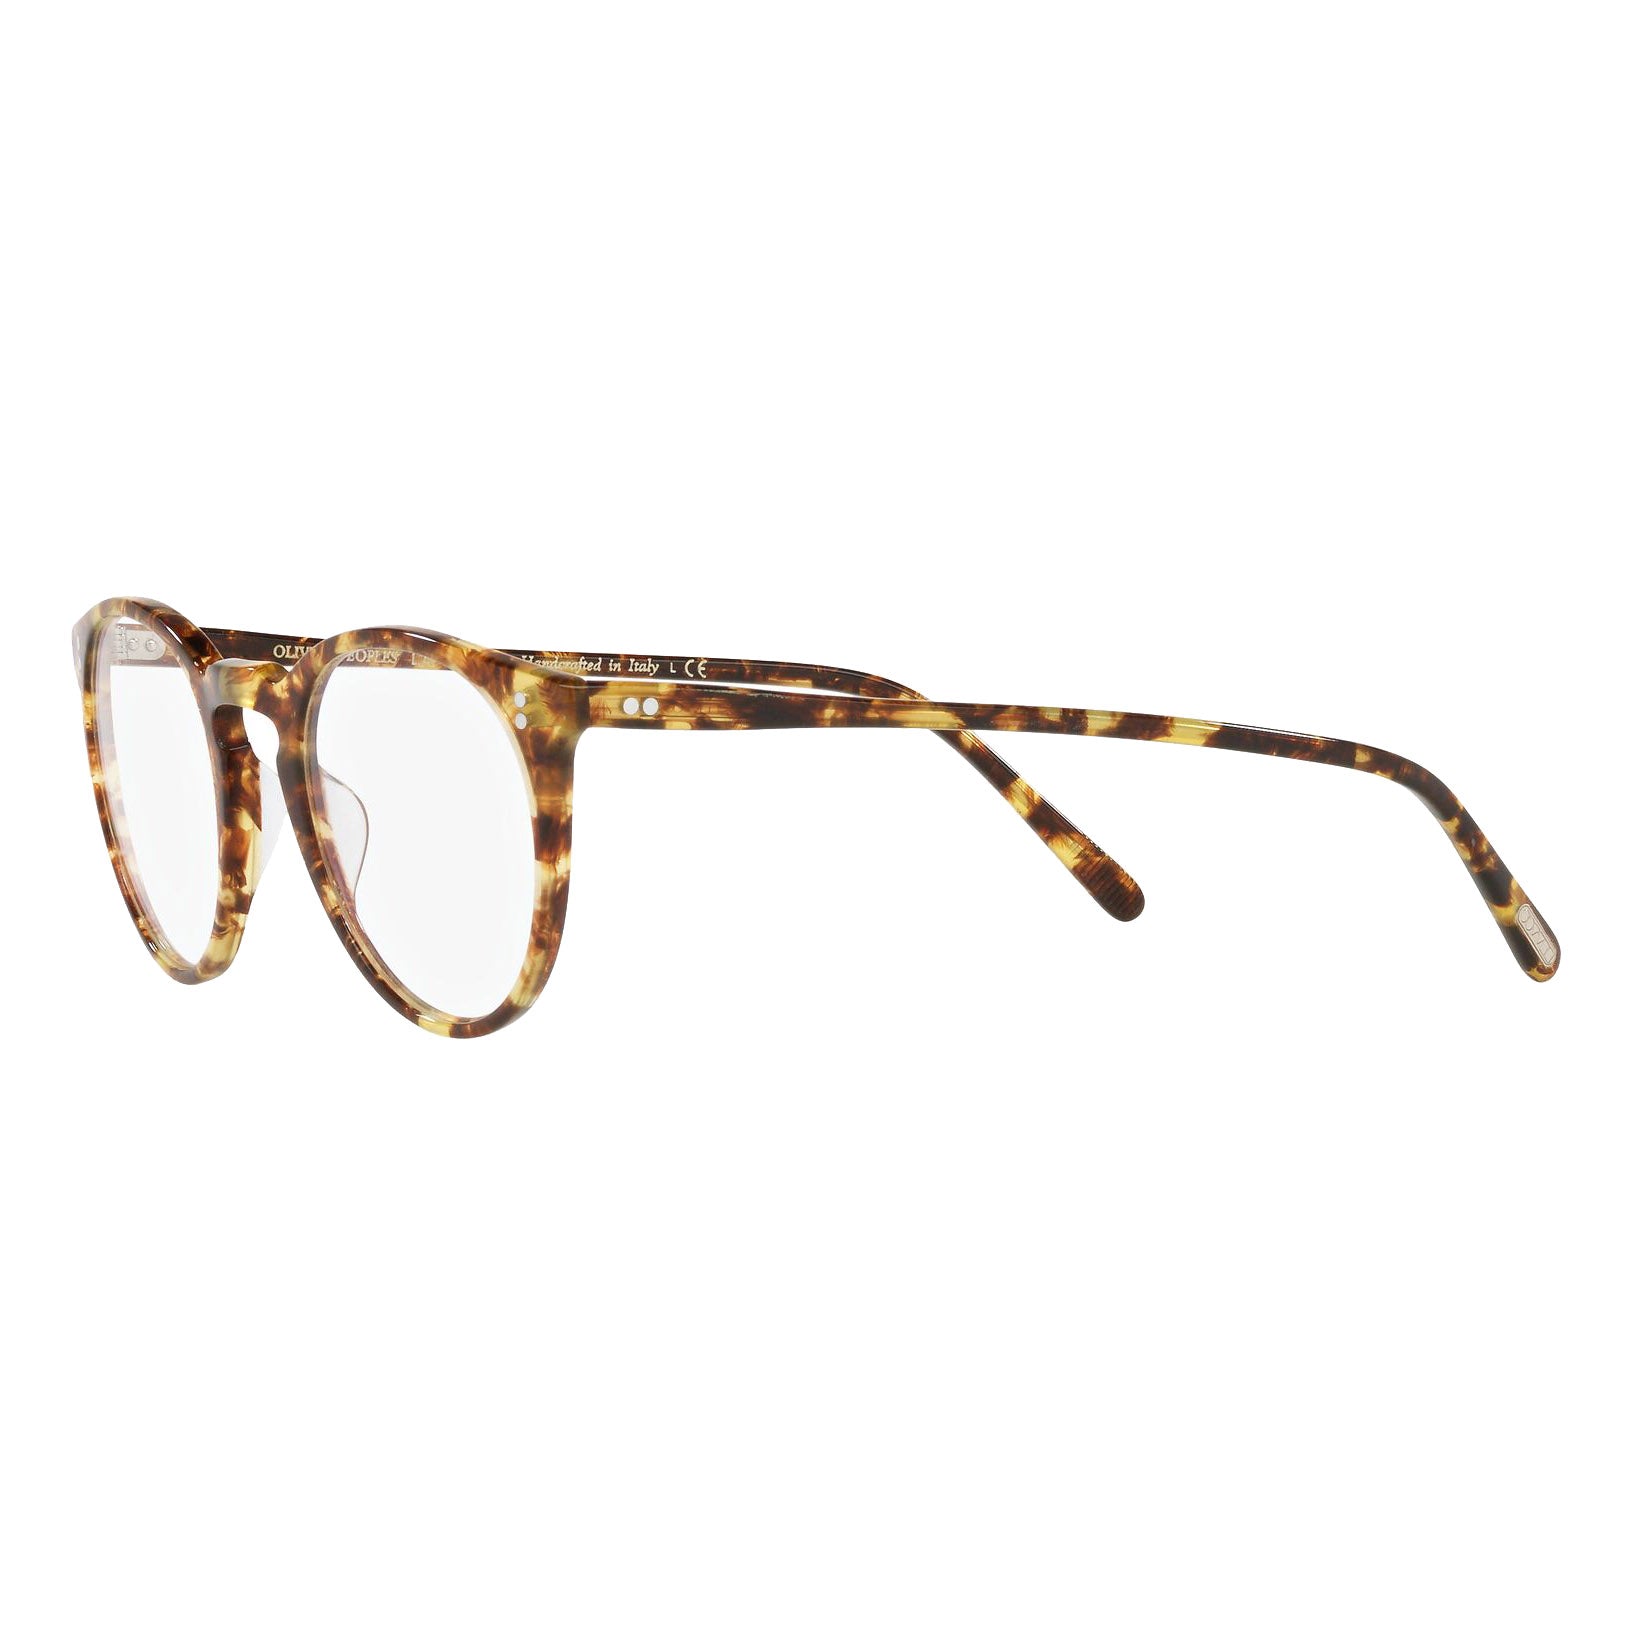 Oliver Peoples O'Malley 382 Rx